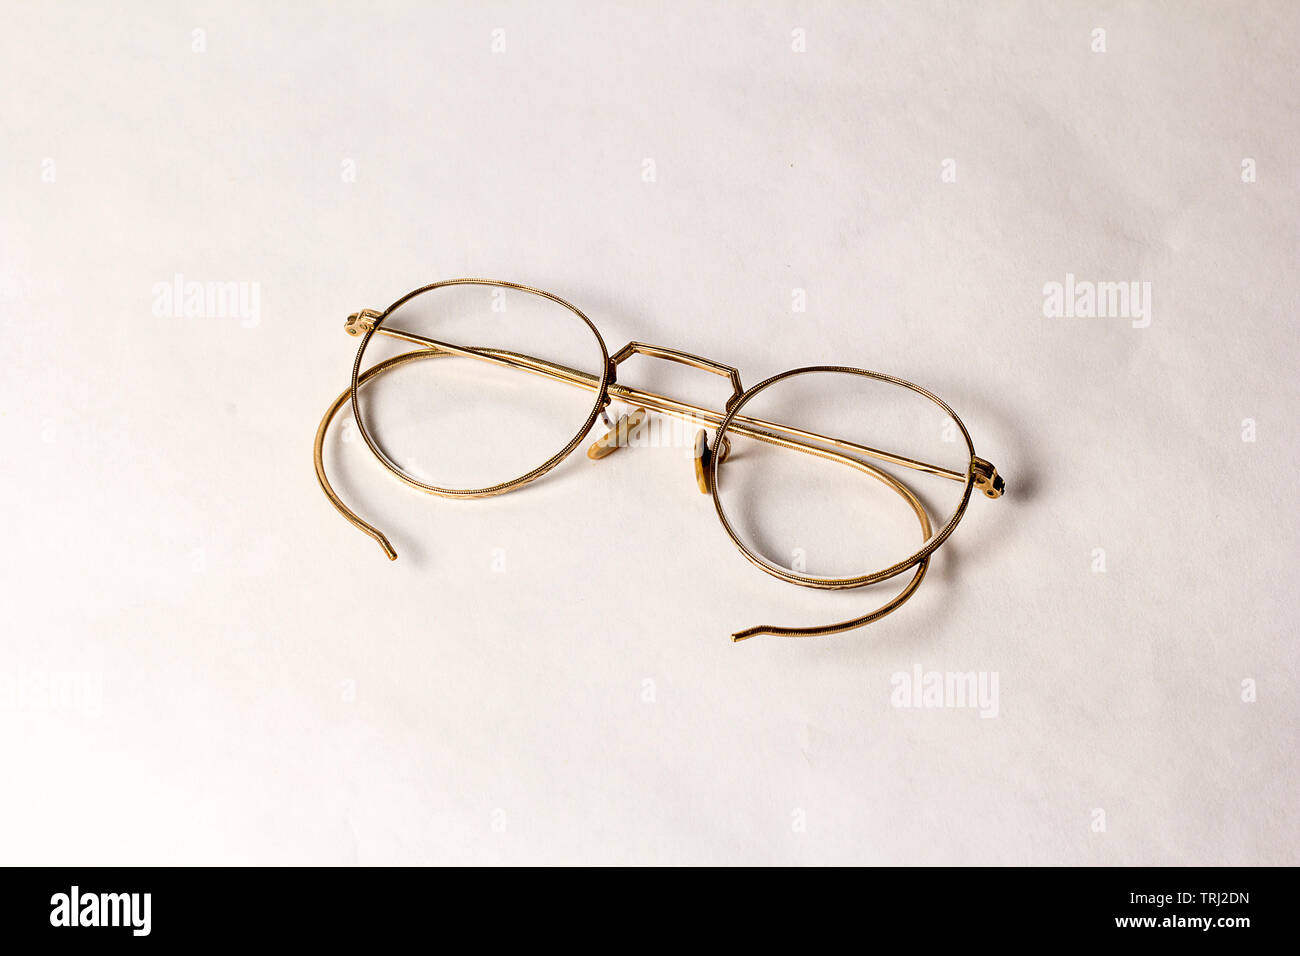 A pair of Antique Eyeglasses on a white background. Stock Photo